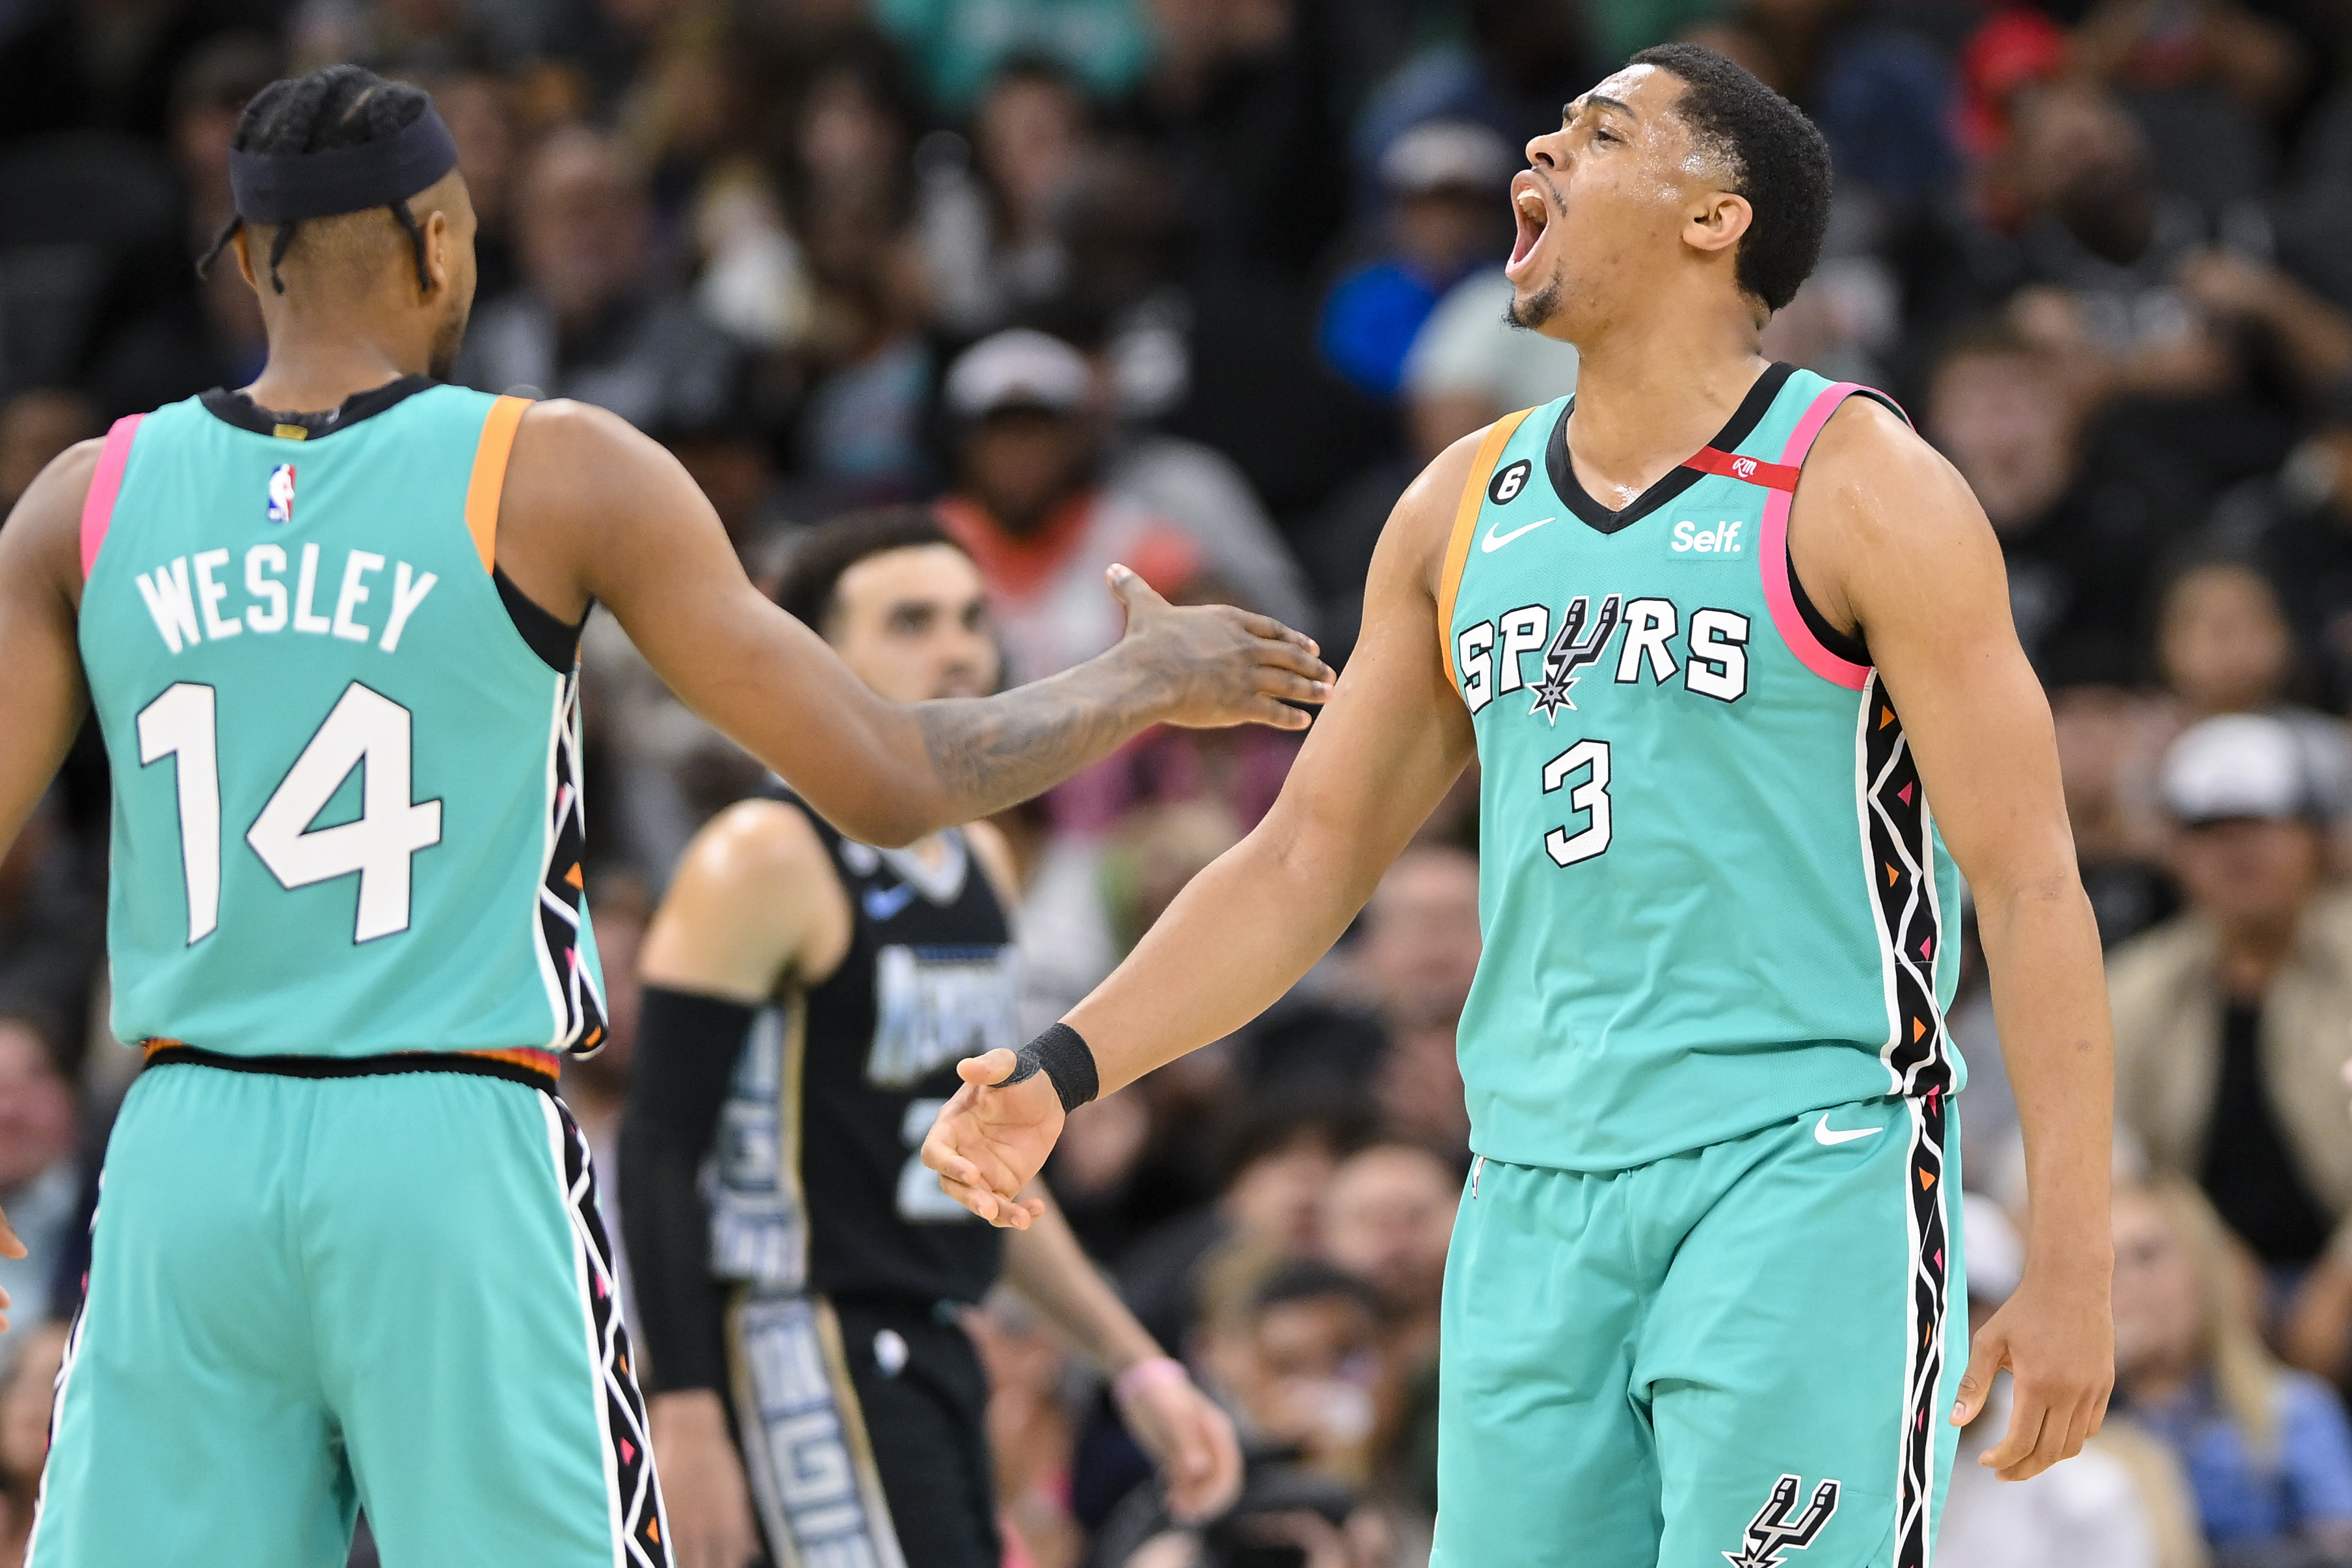 San Antonio Spurs players Keldon Johnson (3) and Blake Wesley celebrate a basket during the second half of an NBA game against the Memphis Grizzlies on March 17, 2023 in San Antonio.  (AP Photo/Darren Abate)